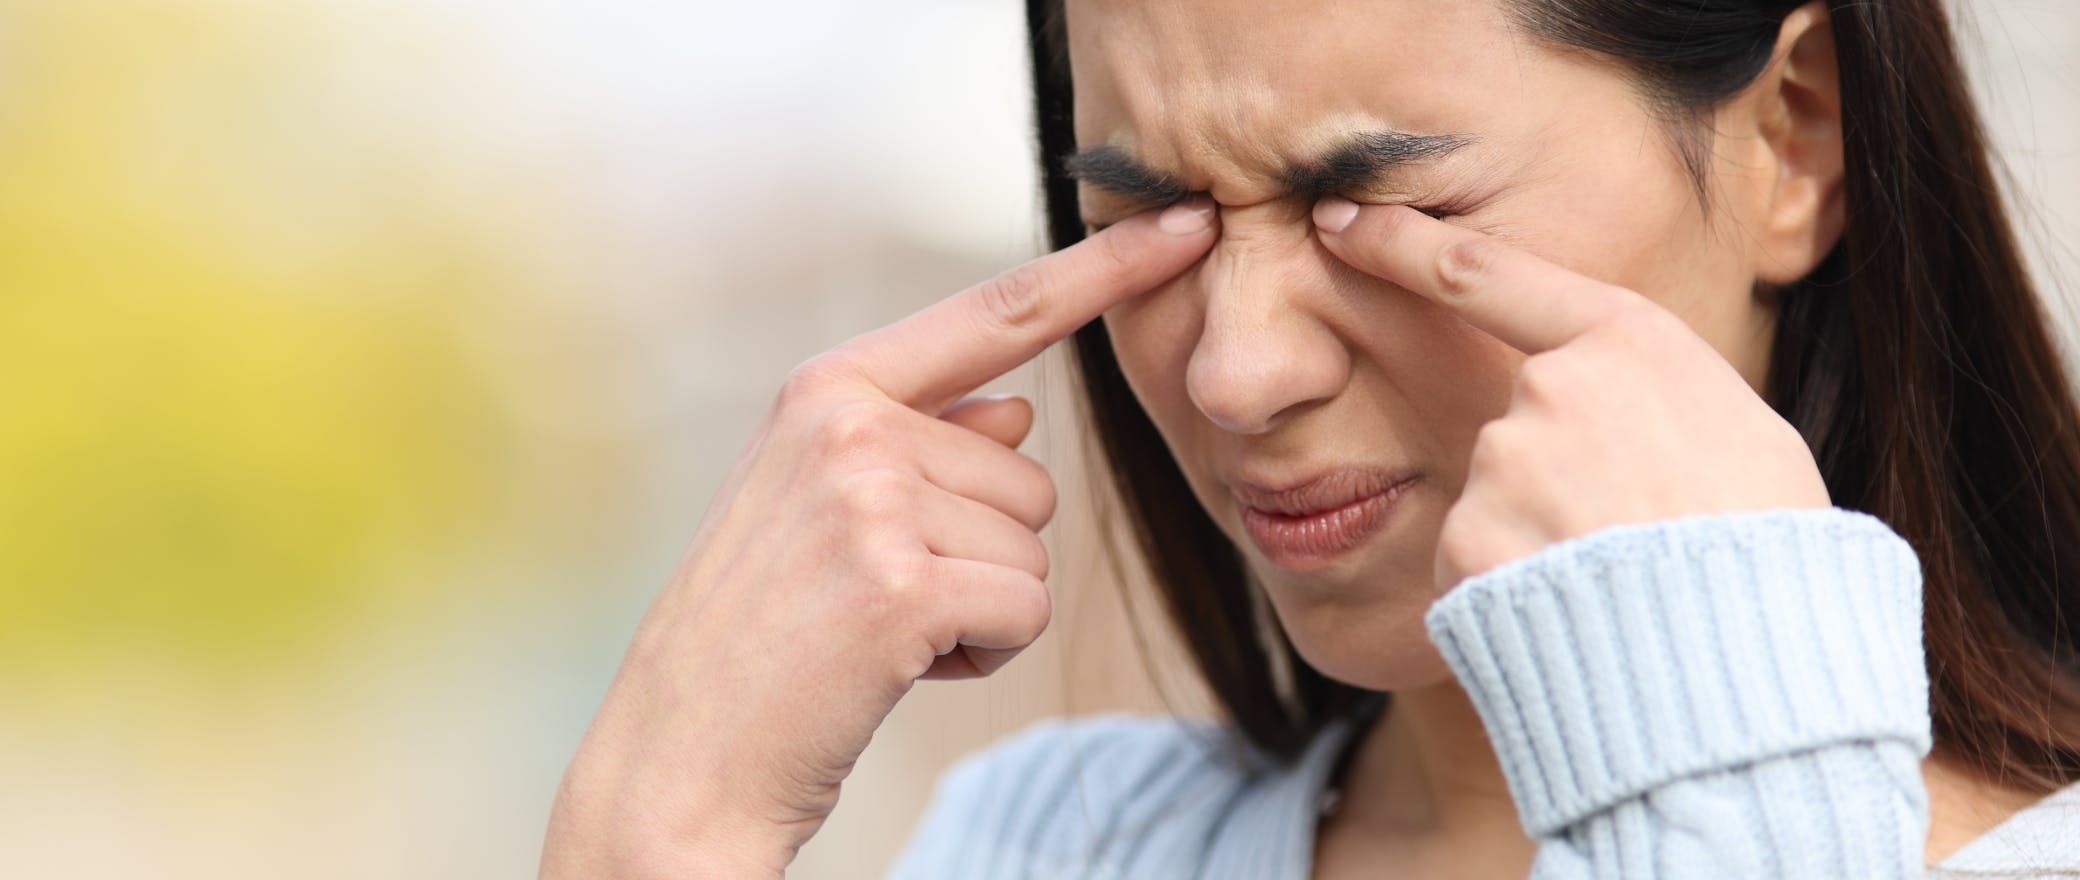 A woman rubbing her eyes due to irritation.